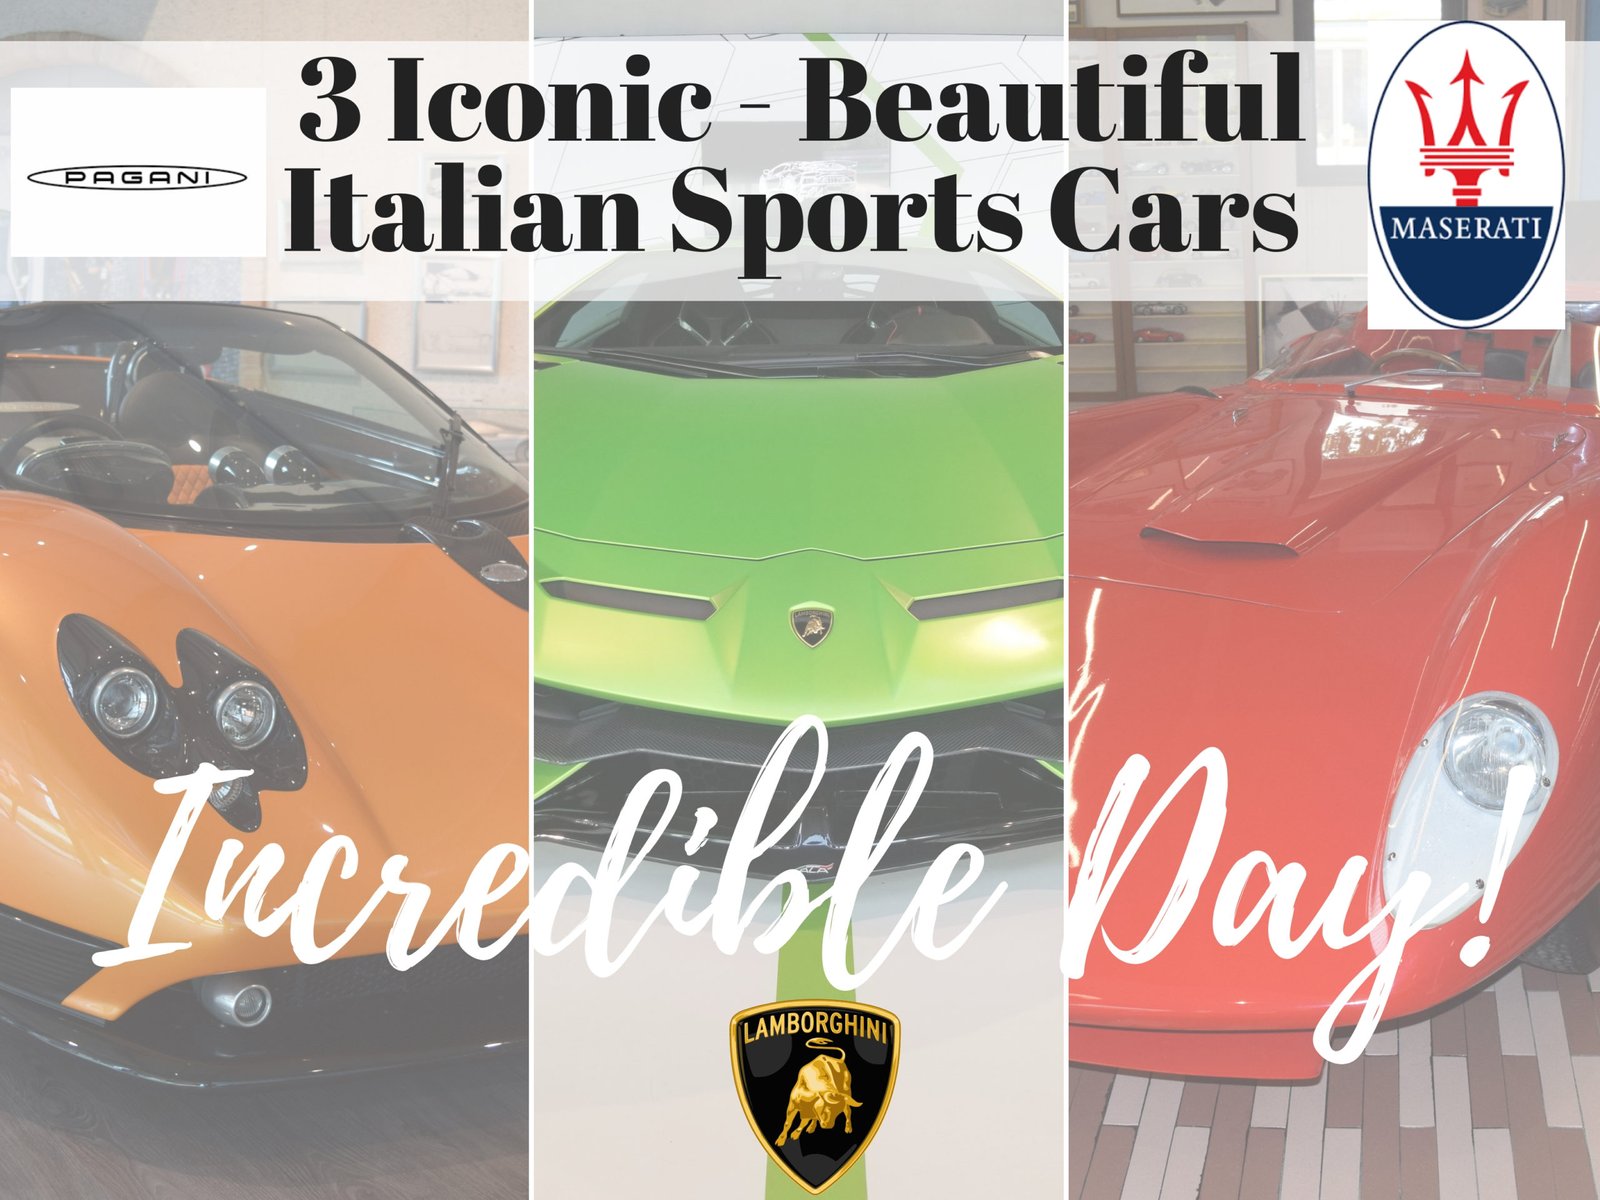 We visited 3 Iconic Italian Sports Car museums and factories in Modena and Bologna. Lamborghini, Pagani, and Masereti, ouritalianjourney.com https://ouritalianjourney.com/3-iconic-beautiful-italian-sports-cars-incredible-day